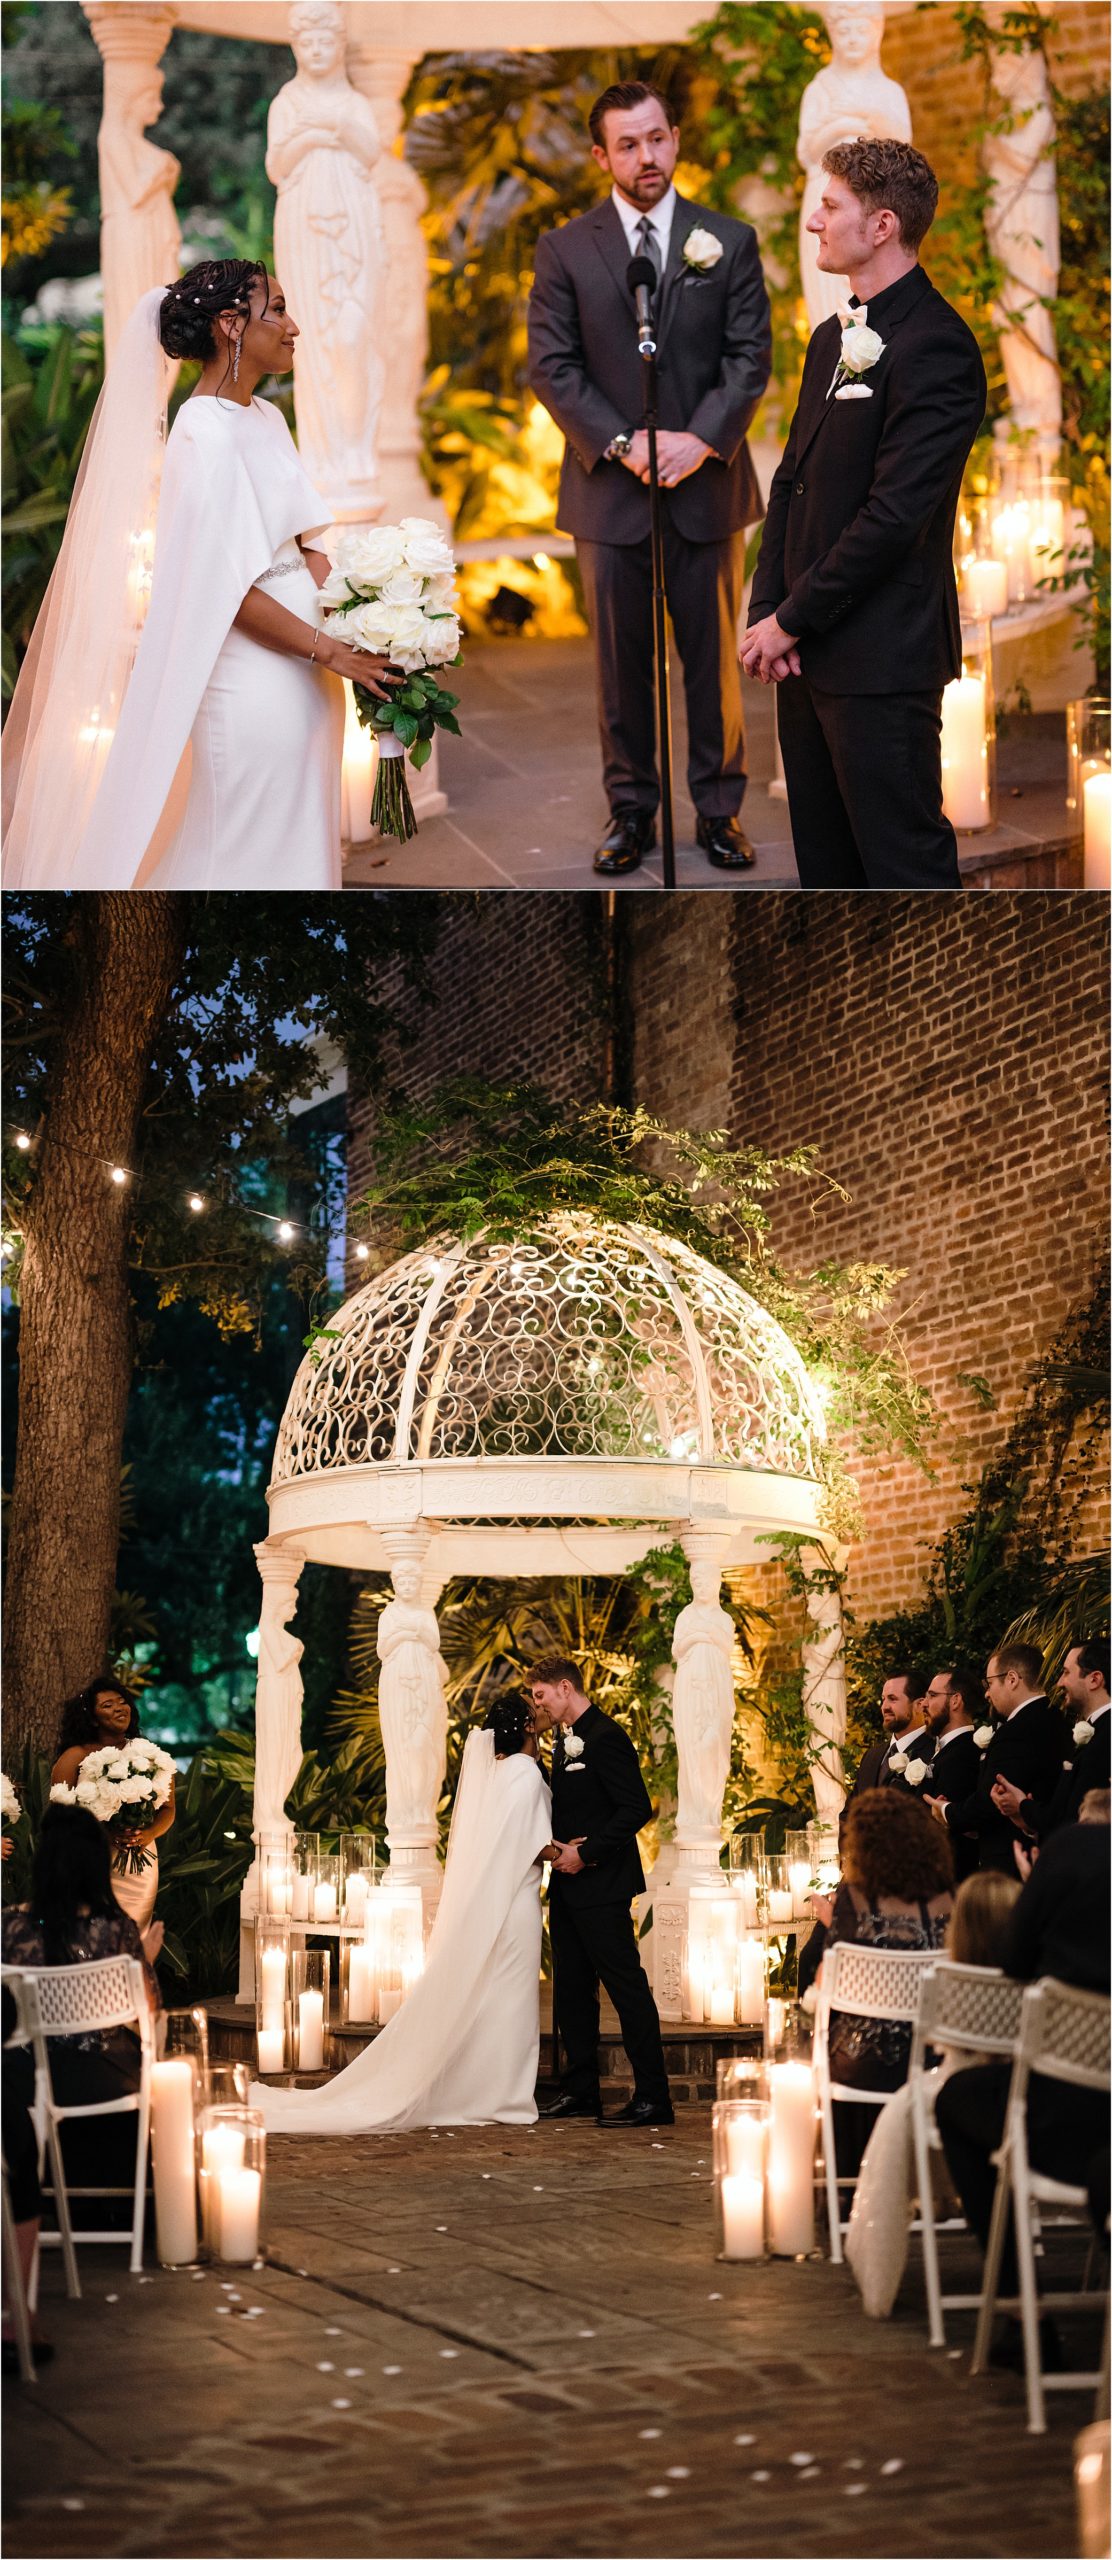 A bride and groom kiss surrounded by pillar candles in a courtyard wedding.